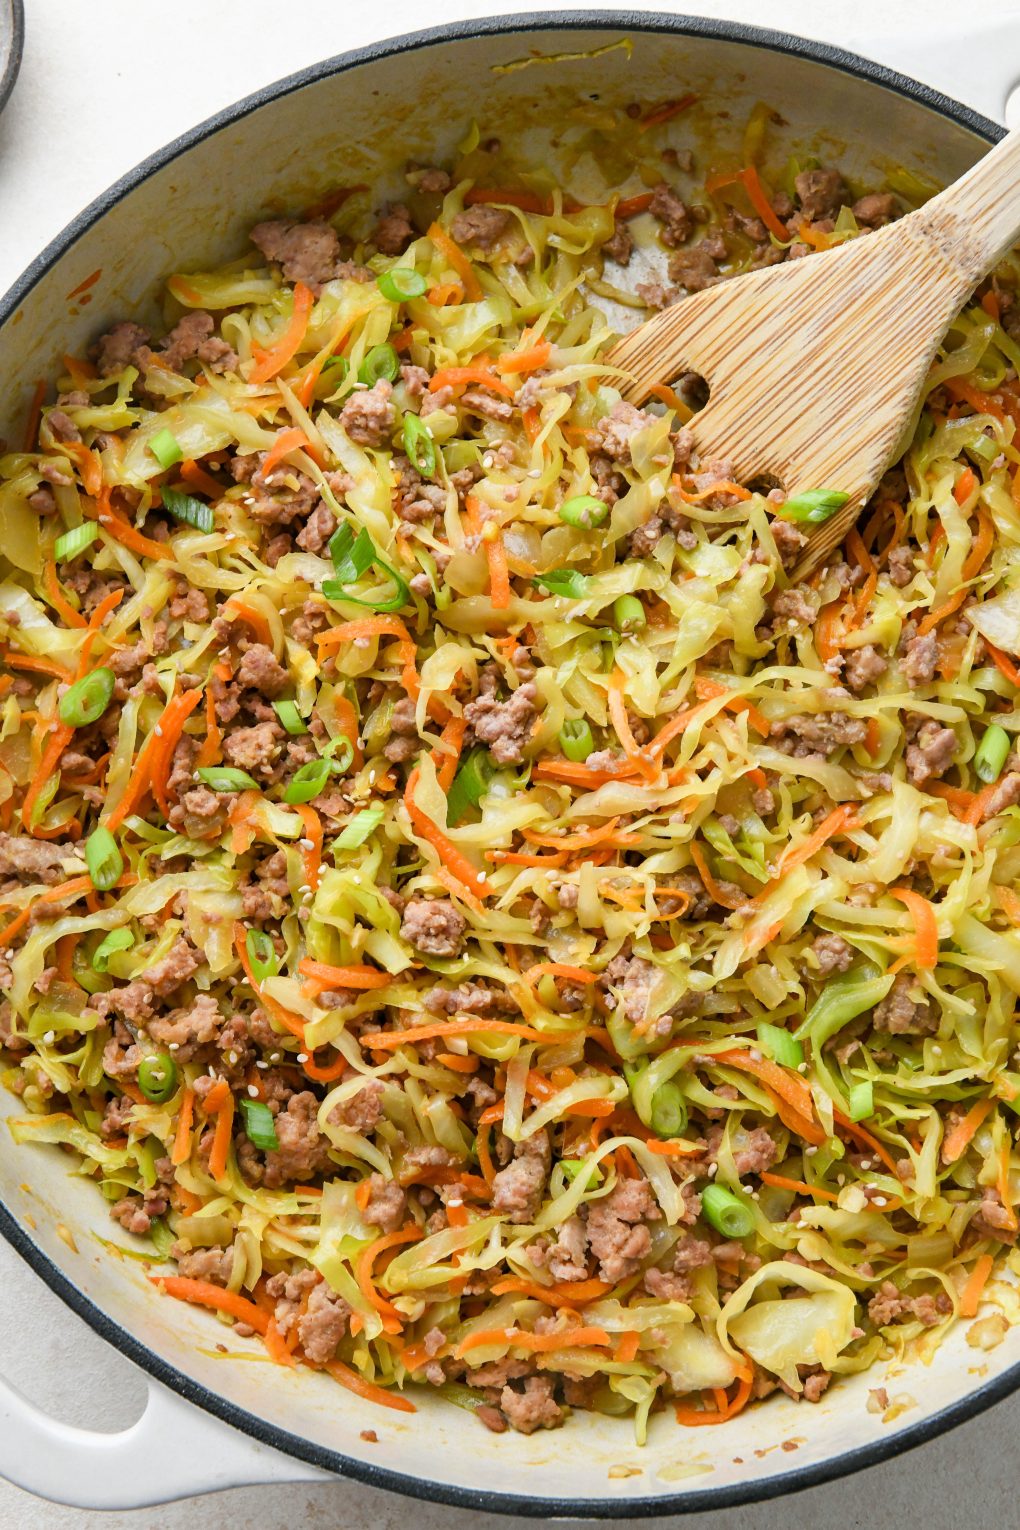 How to make Egg Roll in a Bowl: Cabbage and carrots tender and wilted, and topped with green onions and sesame seeds.